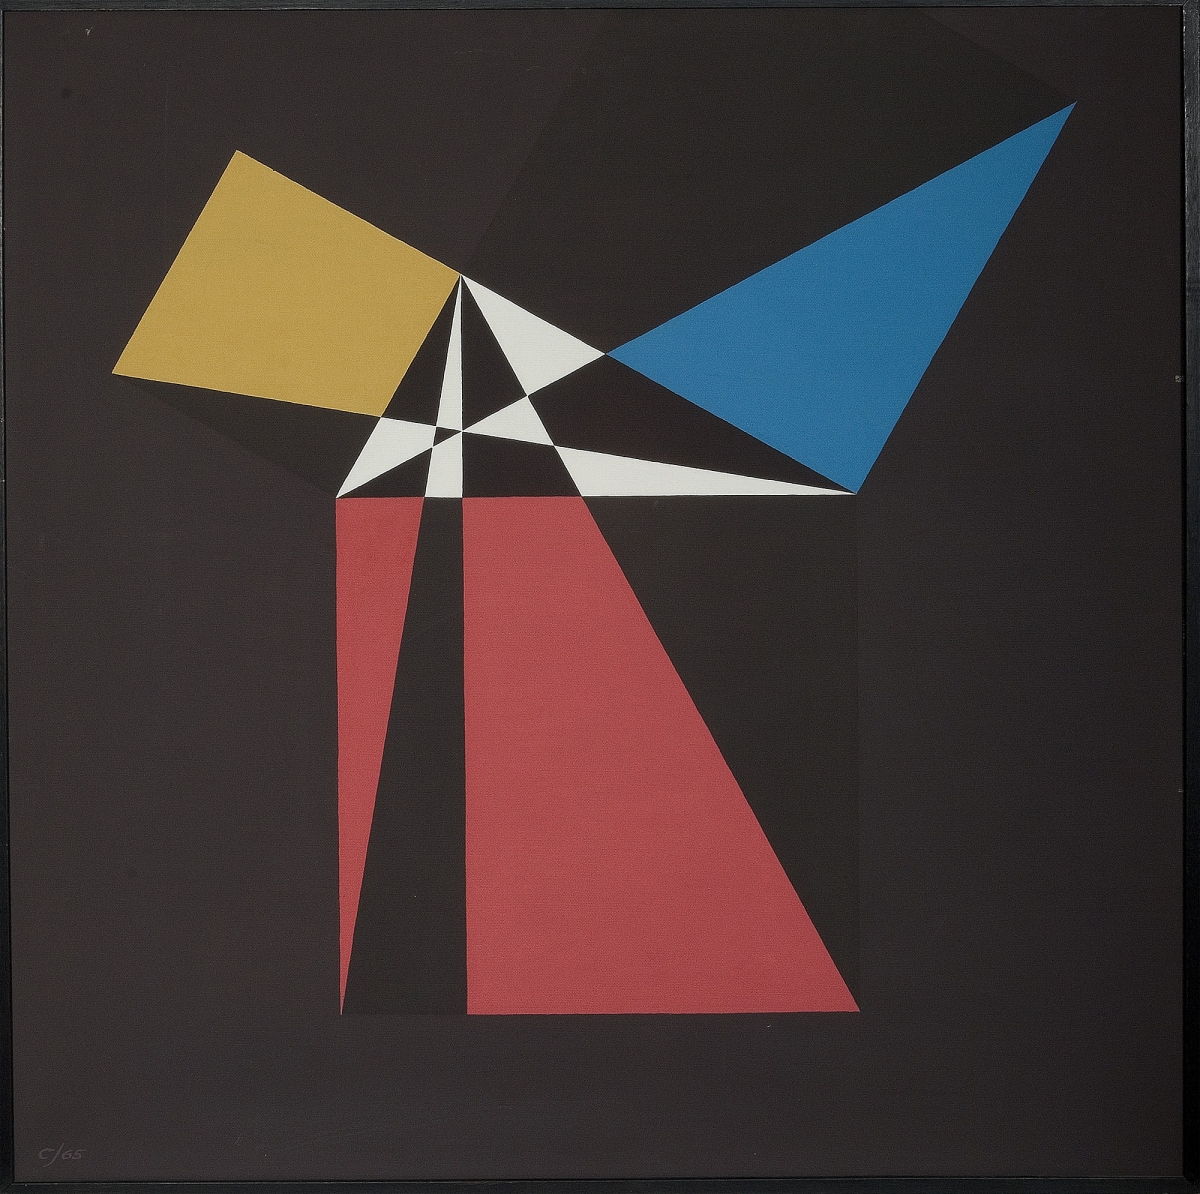 Cultures from across time and around the world have created visual representations of the Pythagorean Theorem. Please enjoy this sampling from Convergence's collection of Mathematical Treasures and find more in our Index, bit.ly/MathTreasures. 1/7 #MAAConveregence